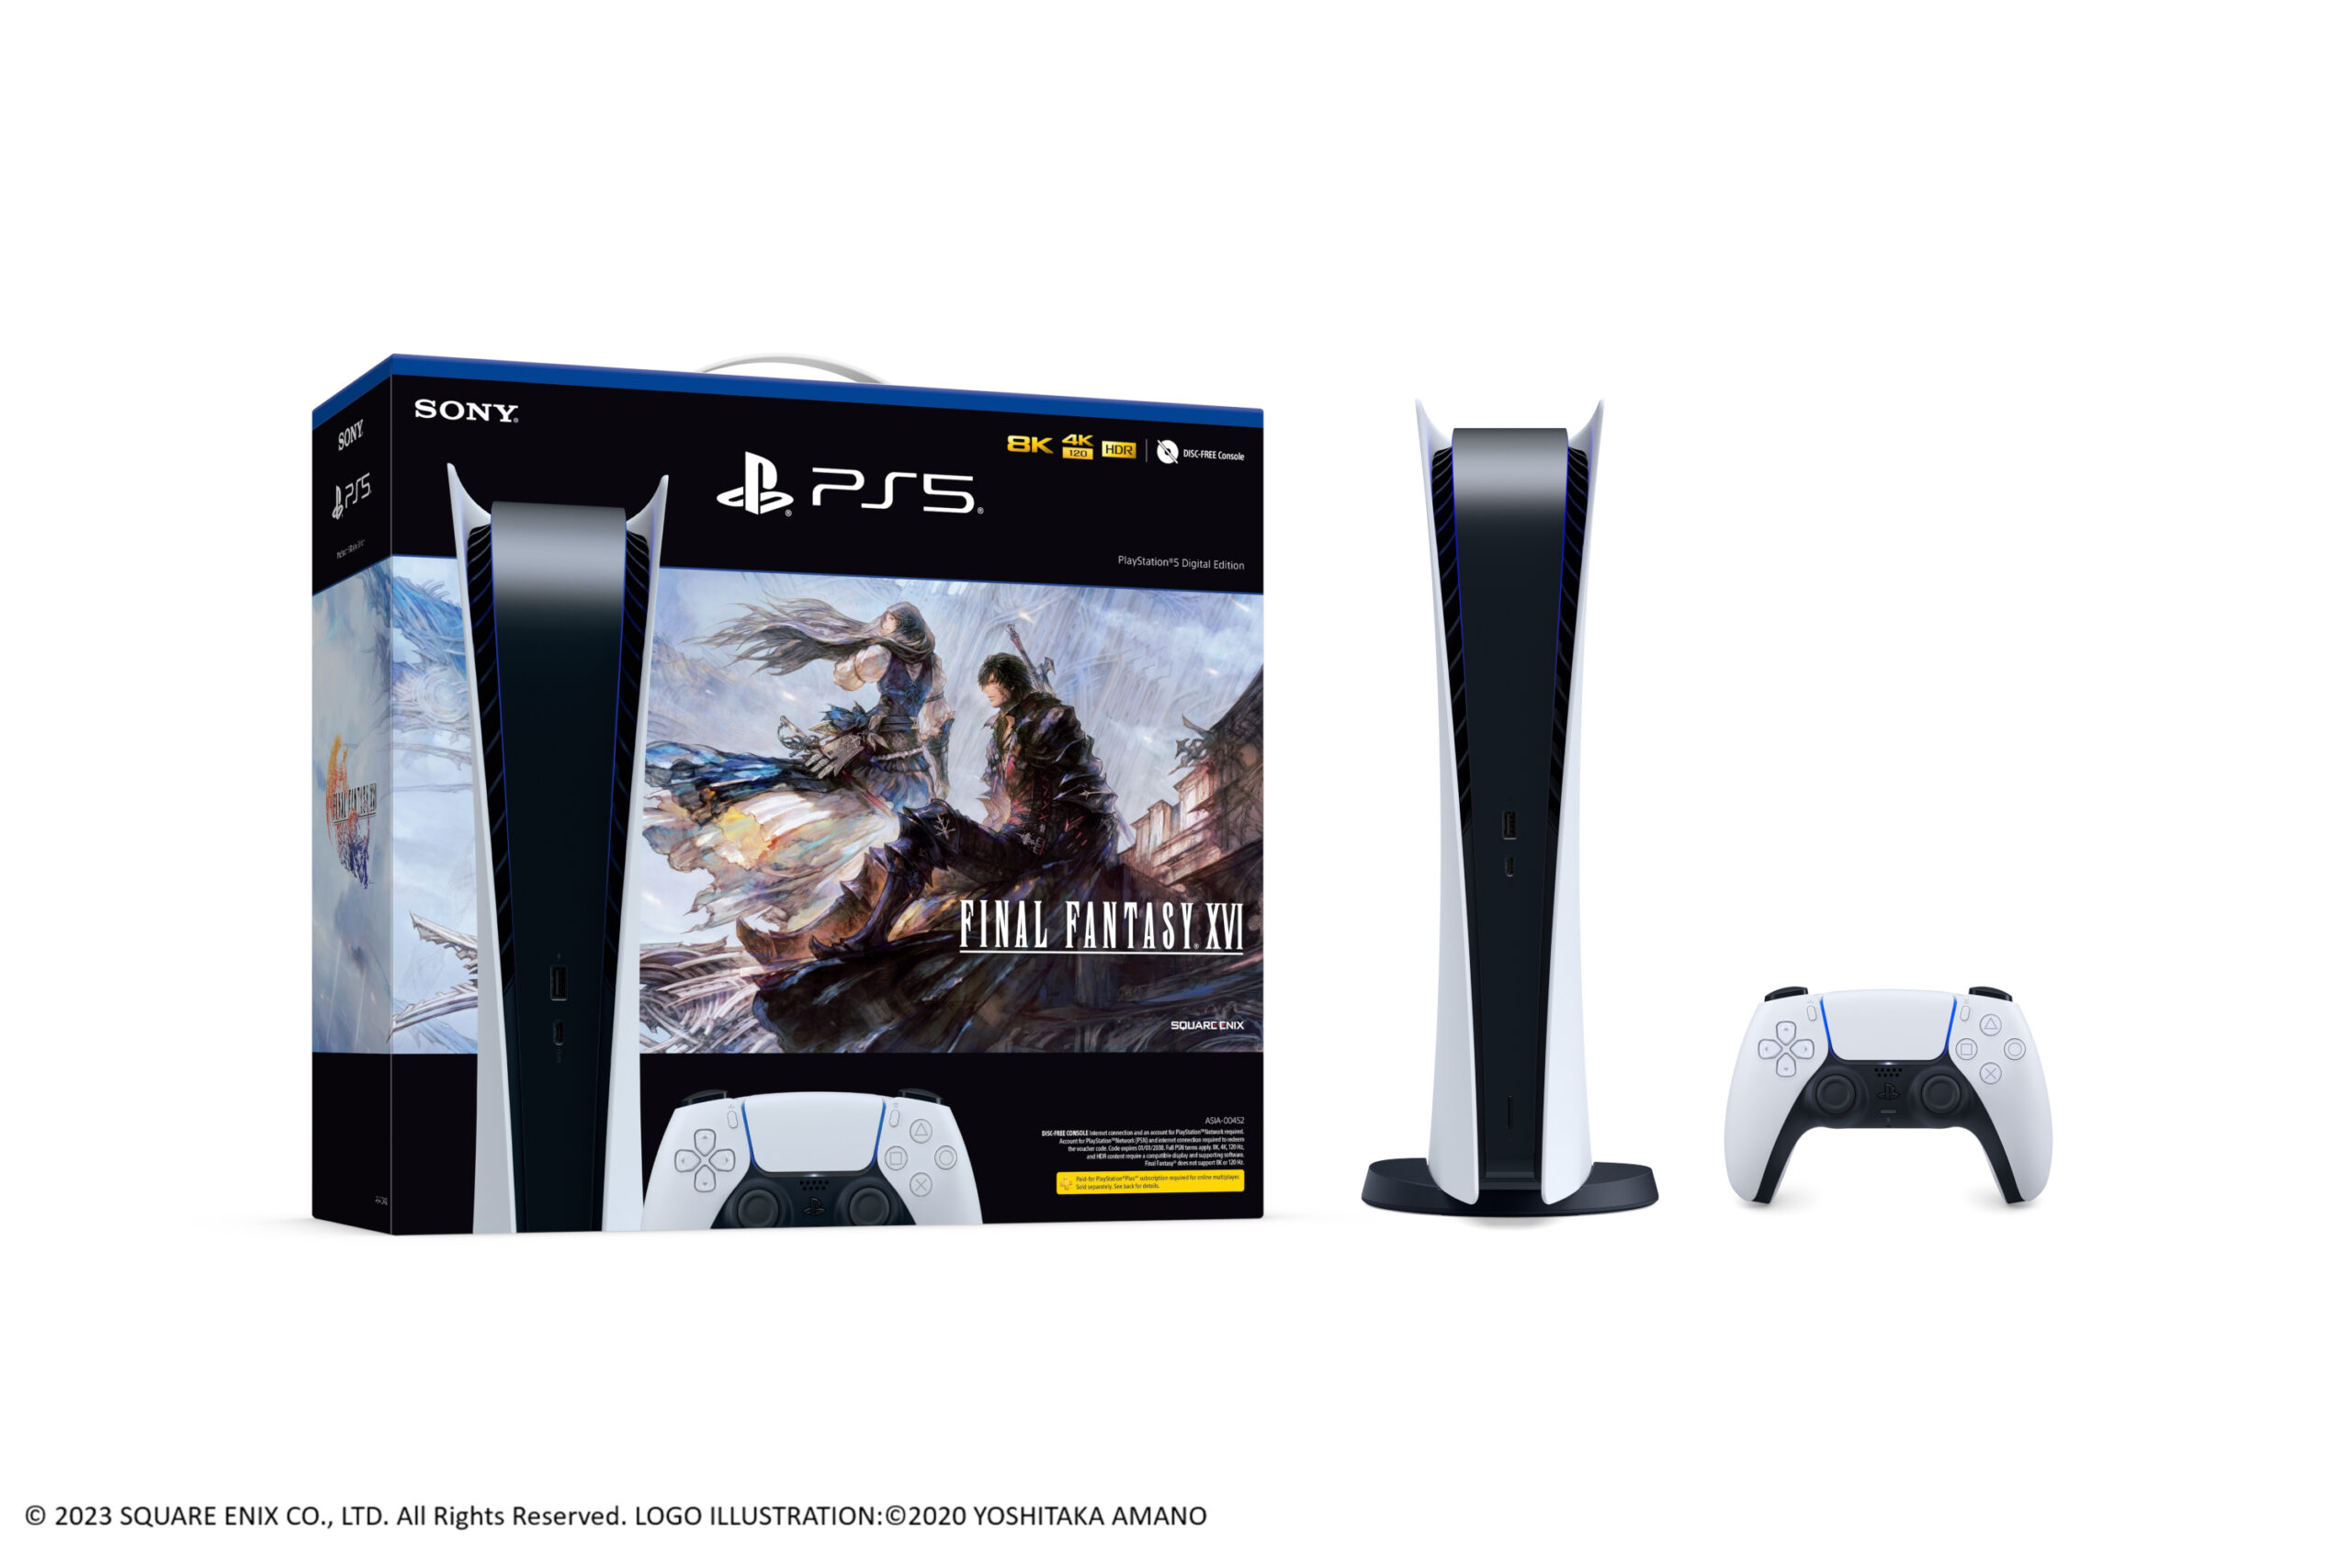 Final Fantasy XVI PS5 Bundle and Accessories Revealed - Cat with Monocle